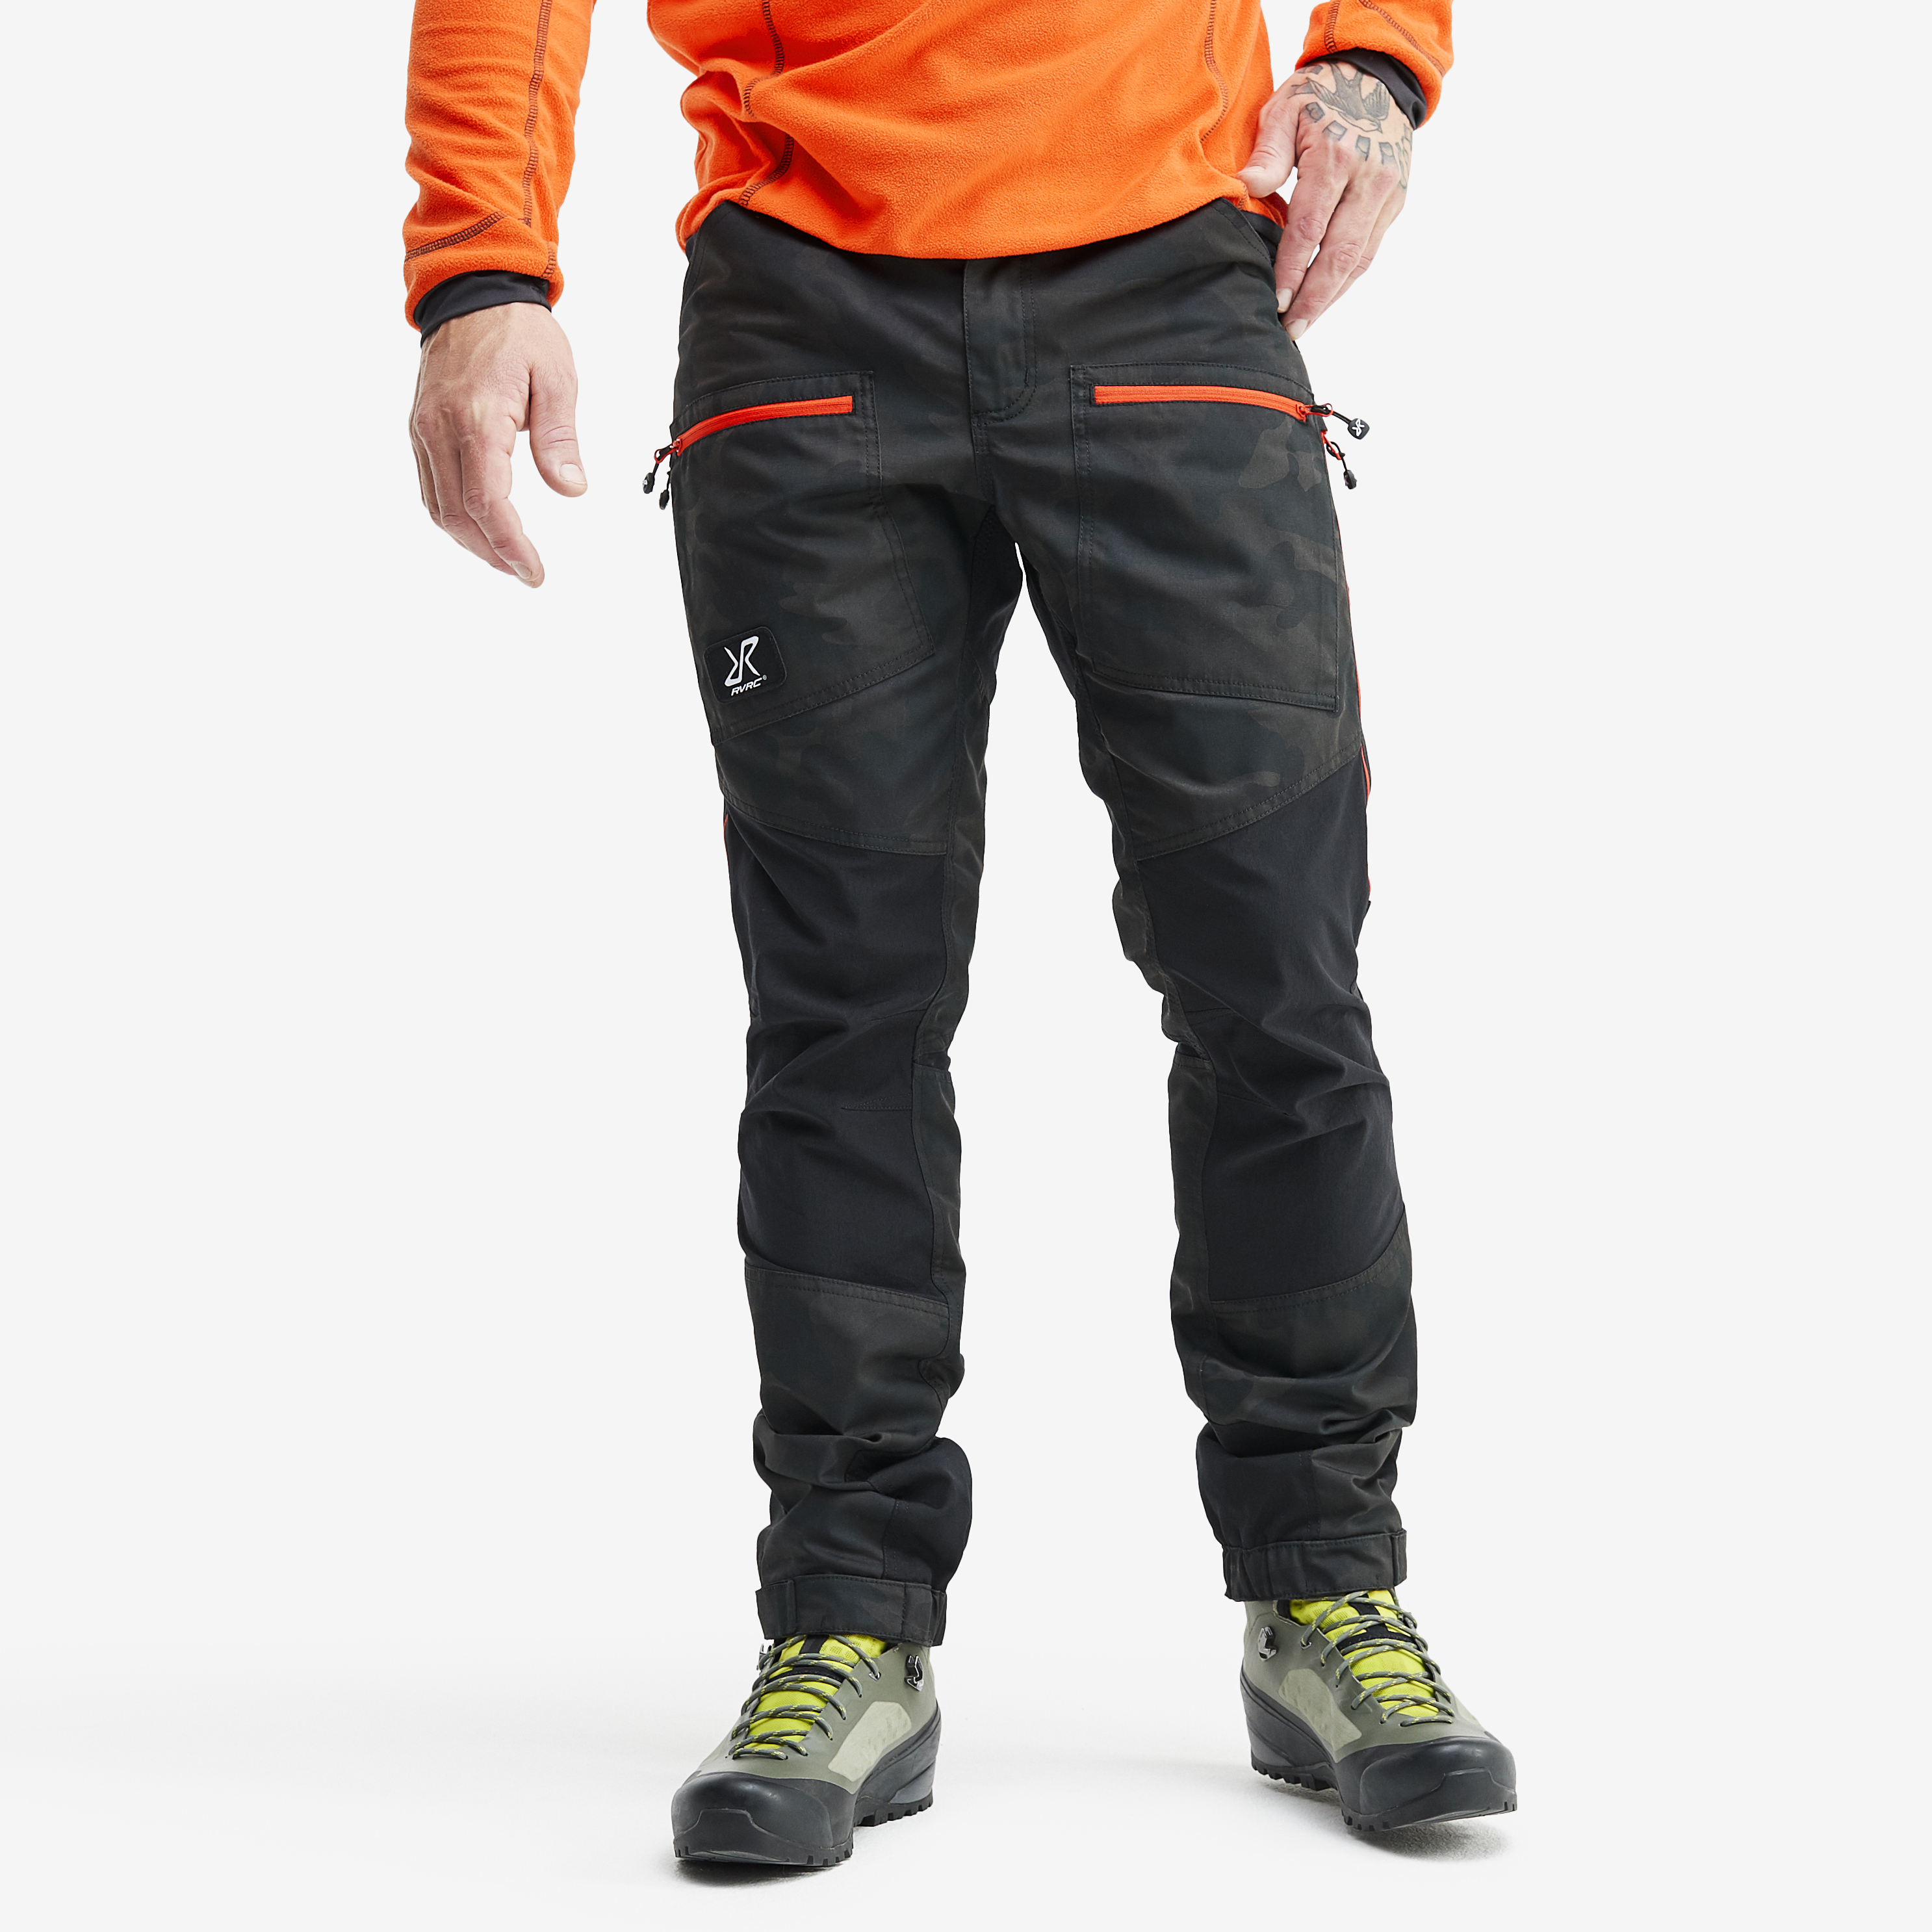 Nordwand Pro hiking trousers for men in black